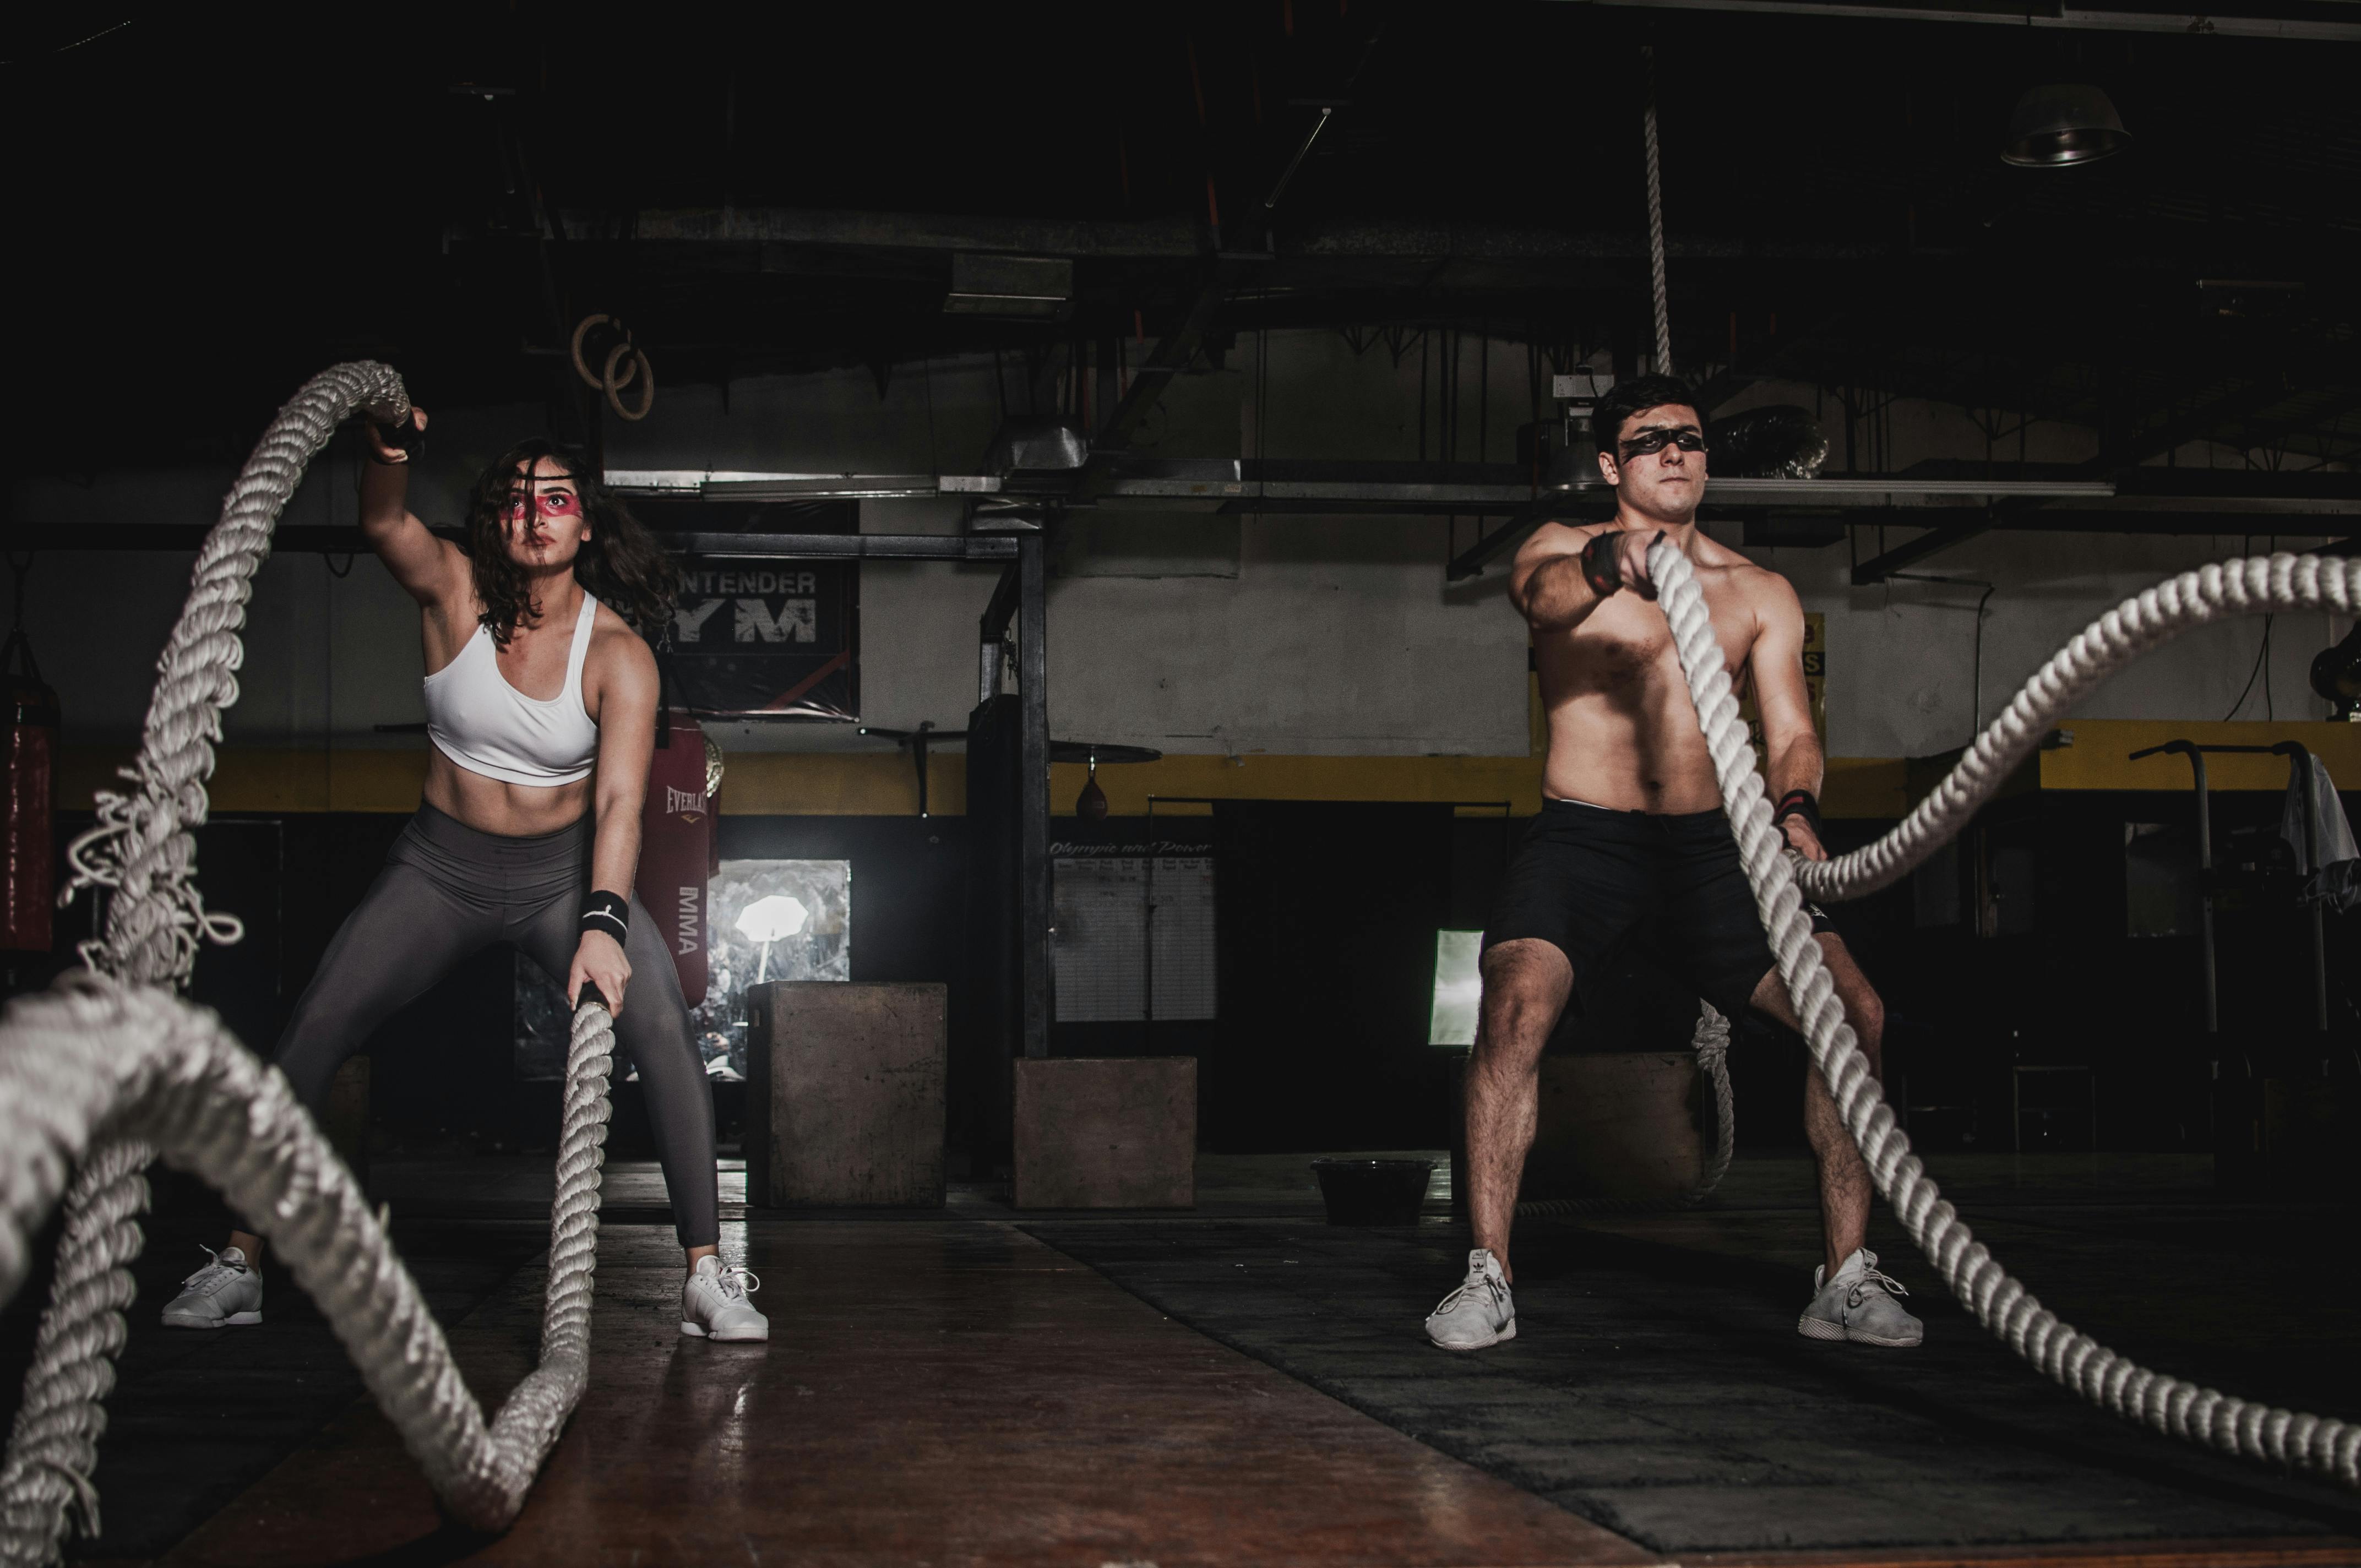 Two people working out with ropes